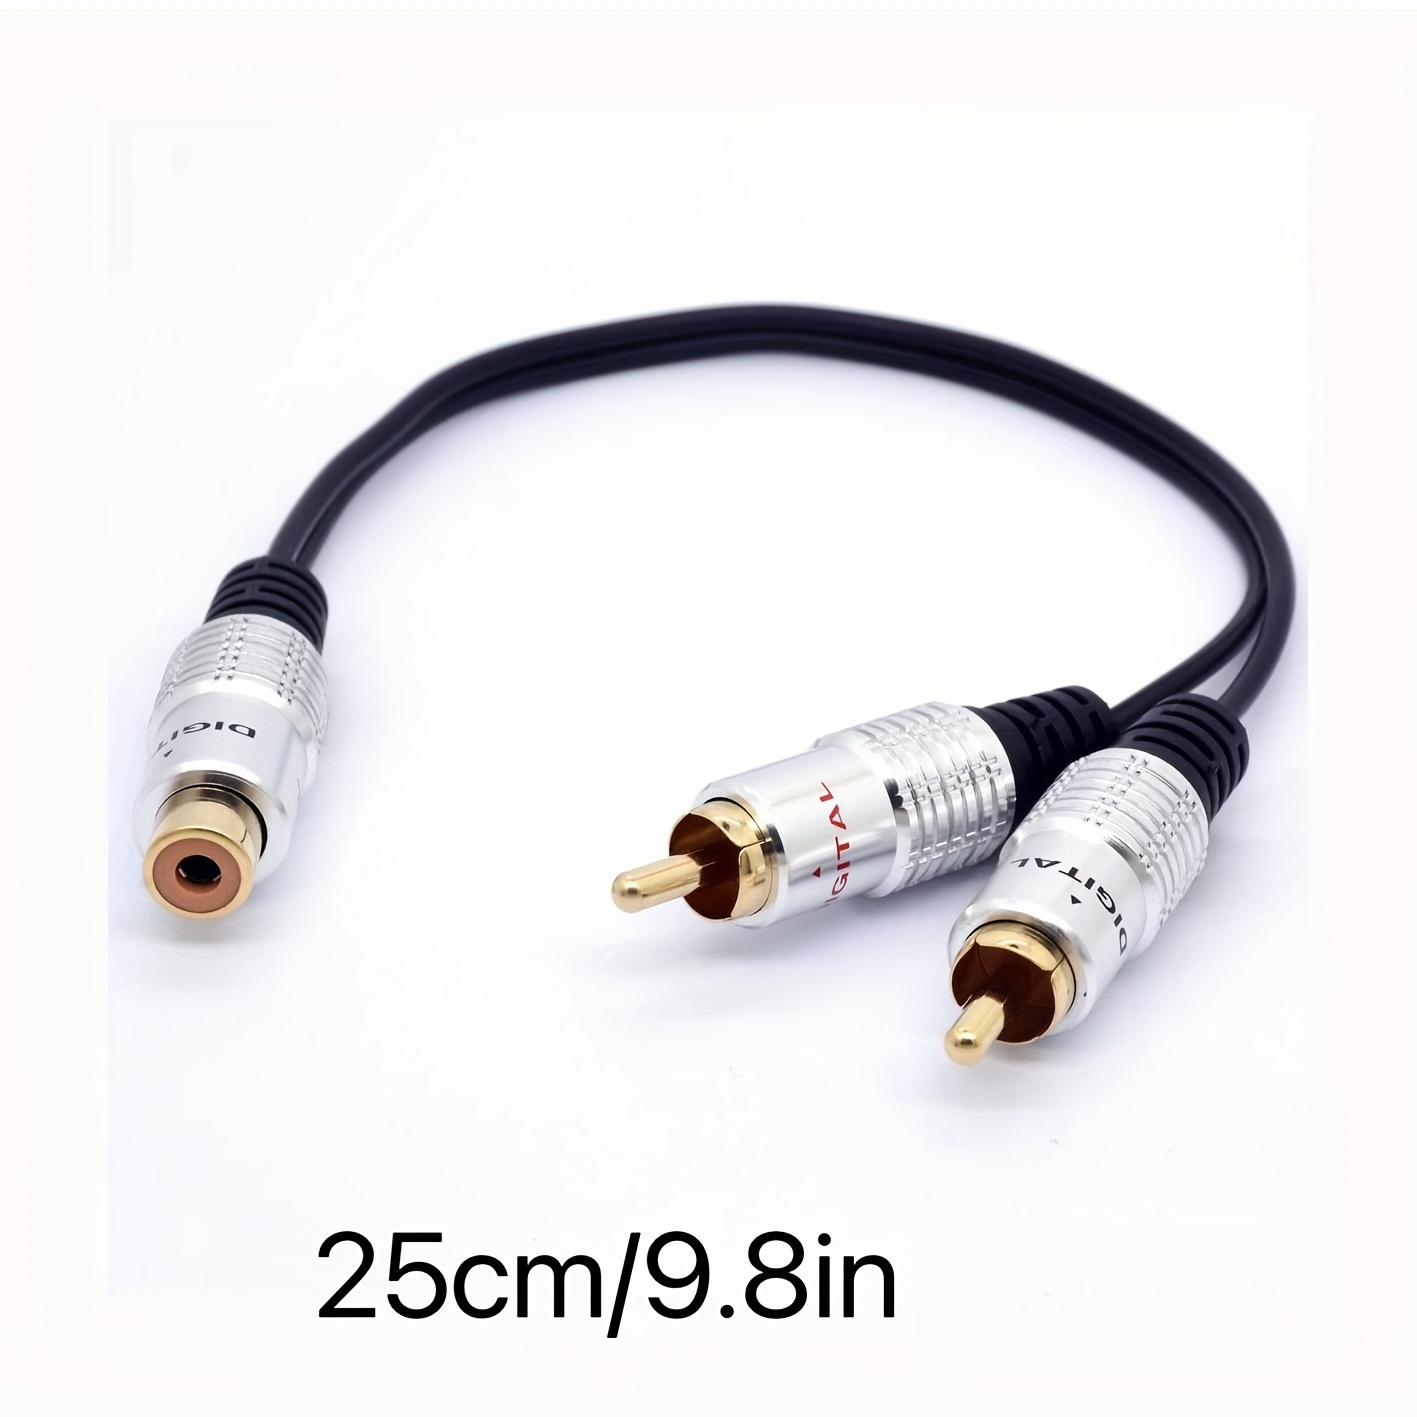 8 Inch Gold-Plated RCA Female to Dual RCA Male Y Splitter Cable Adapter for  Subwoofer